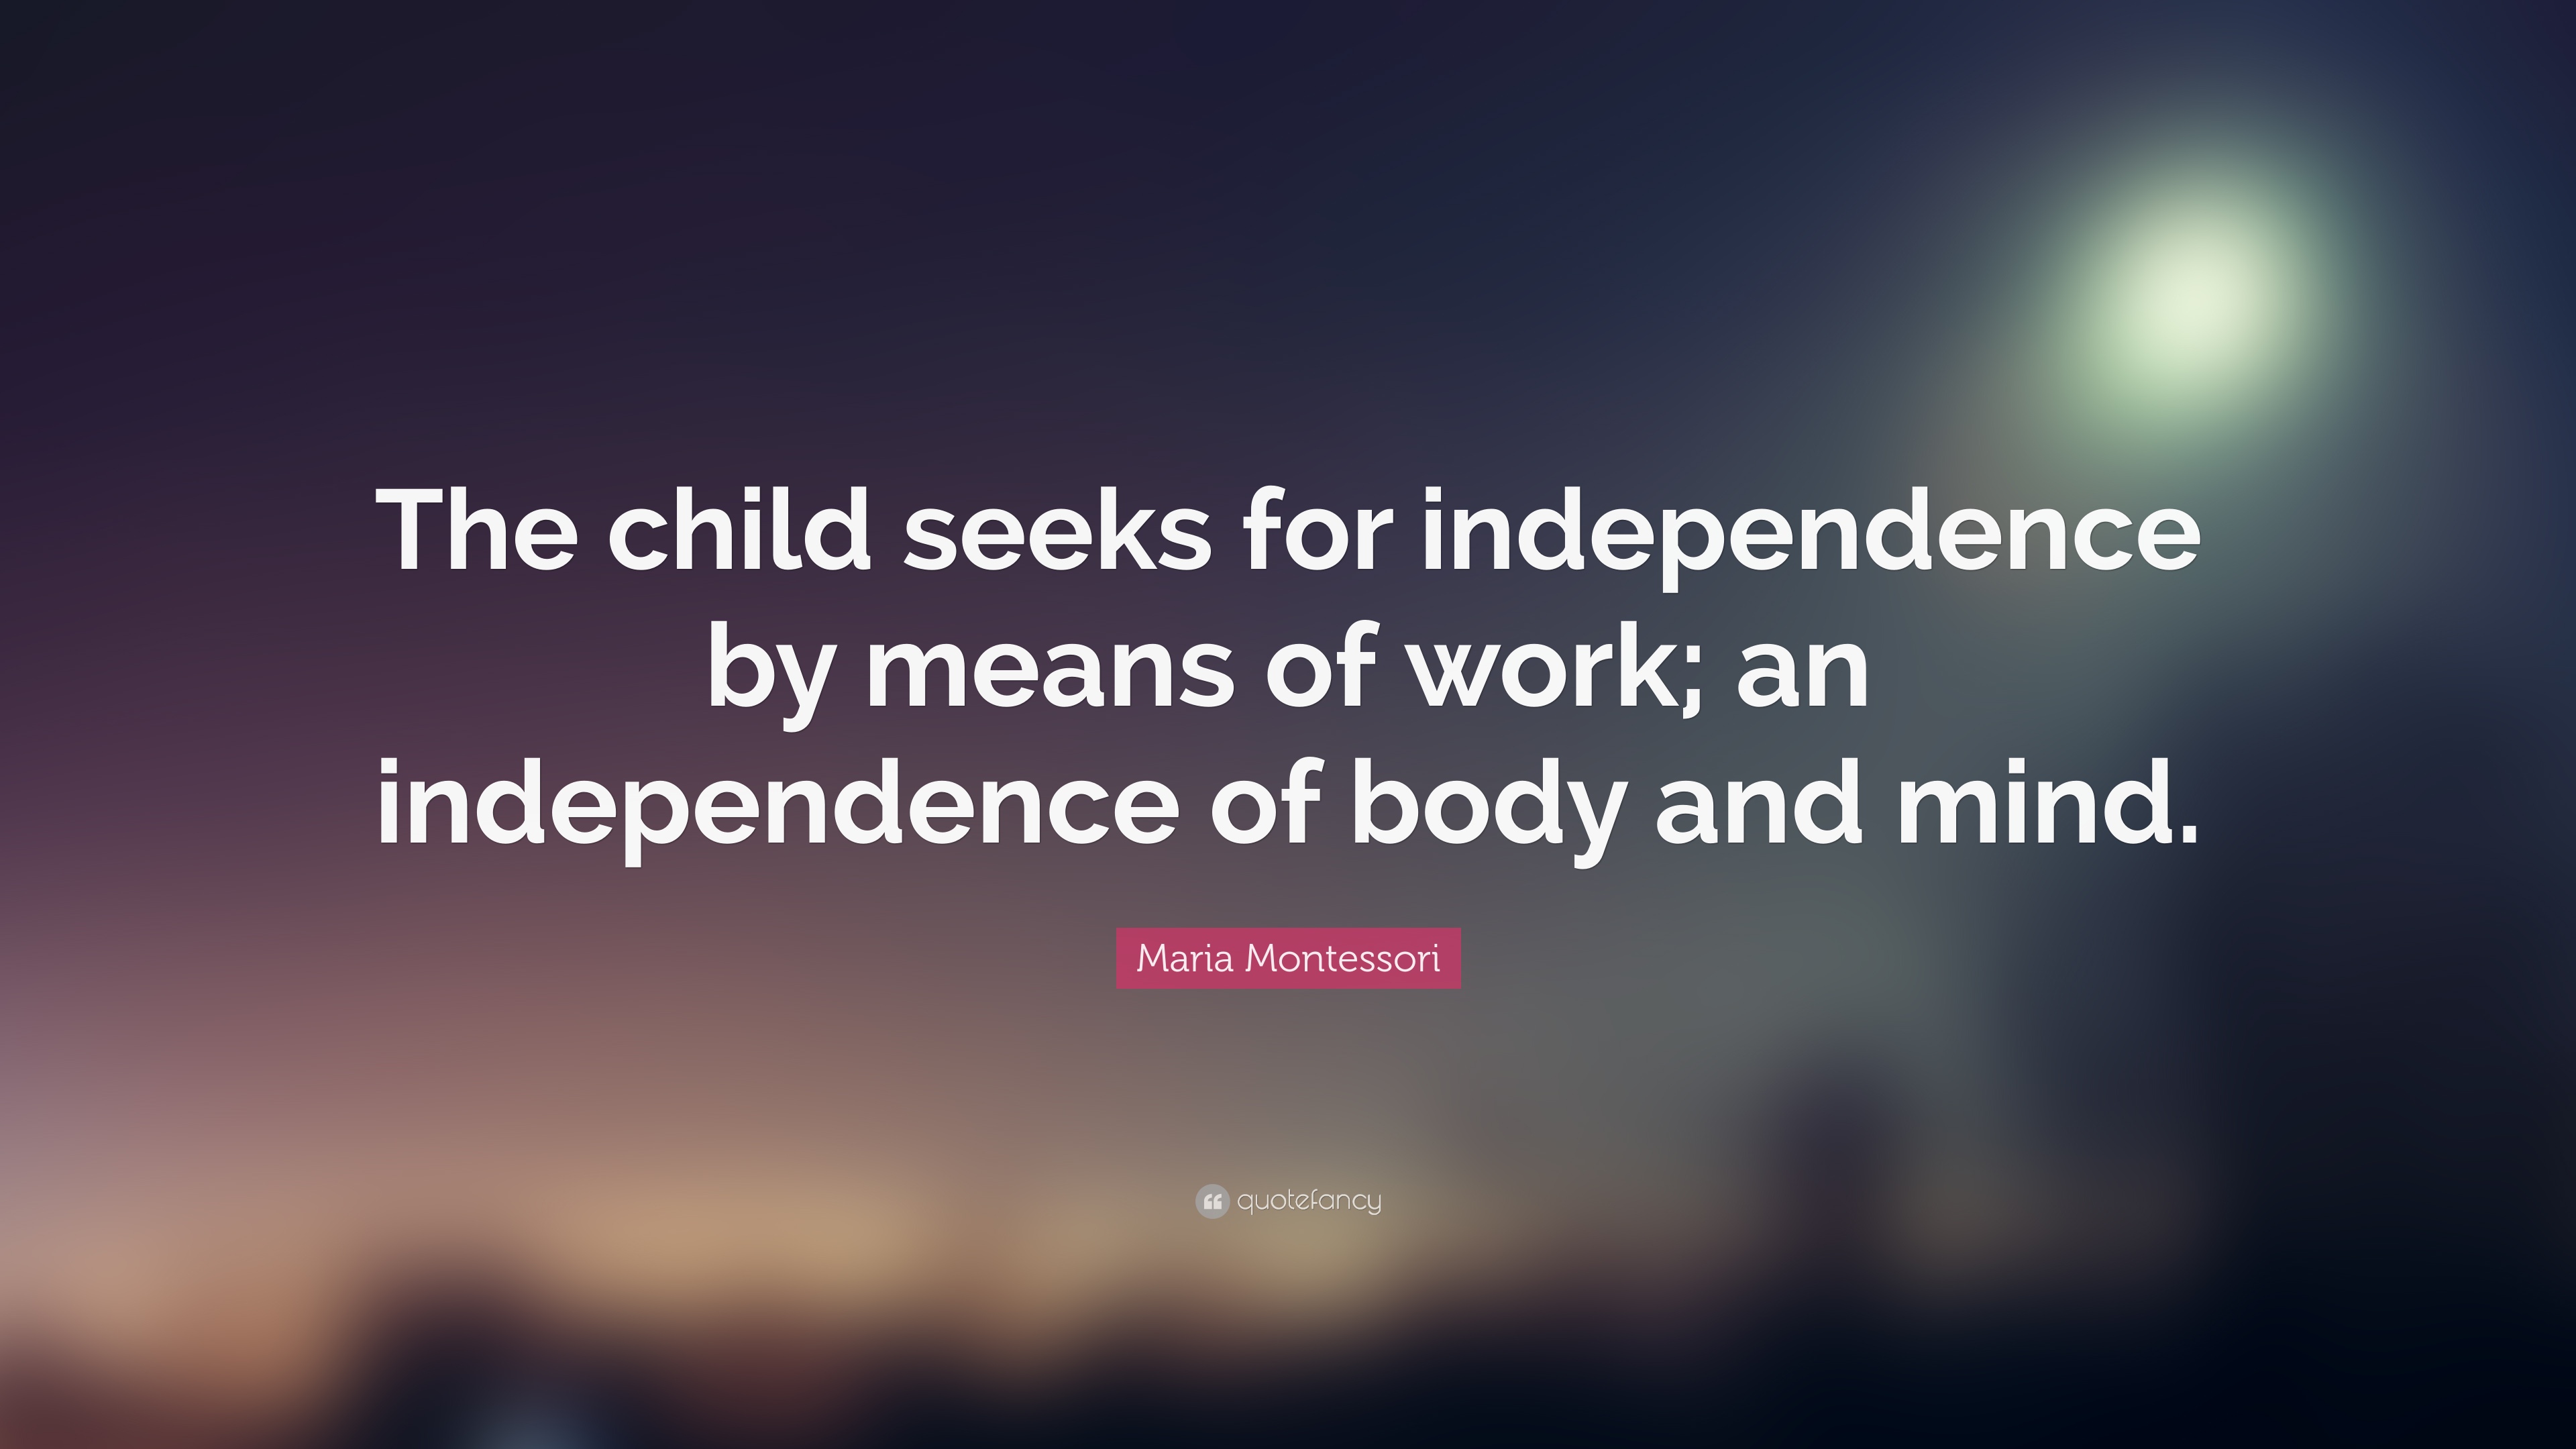 the child seeks for independence by means of work an independence of body and mind. maria montessoru